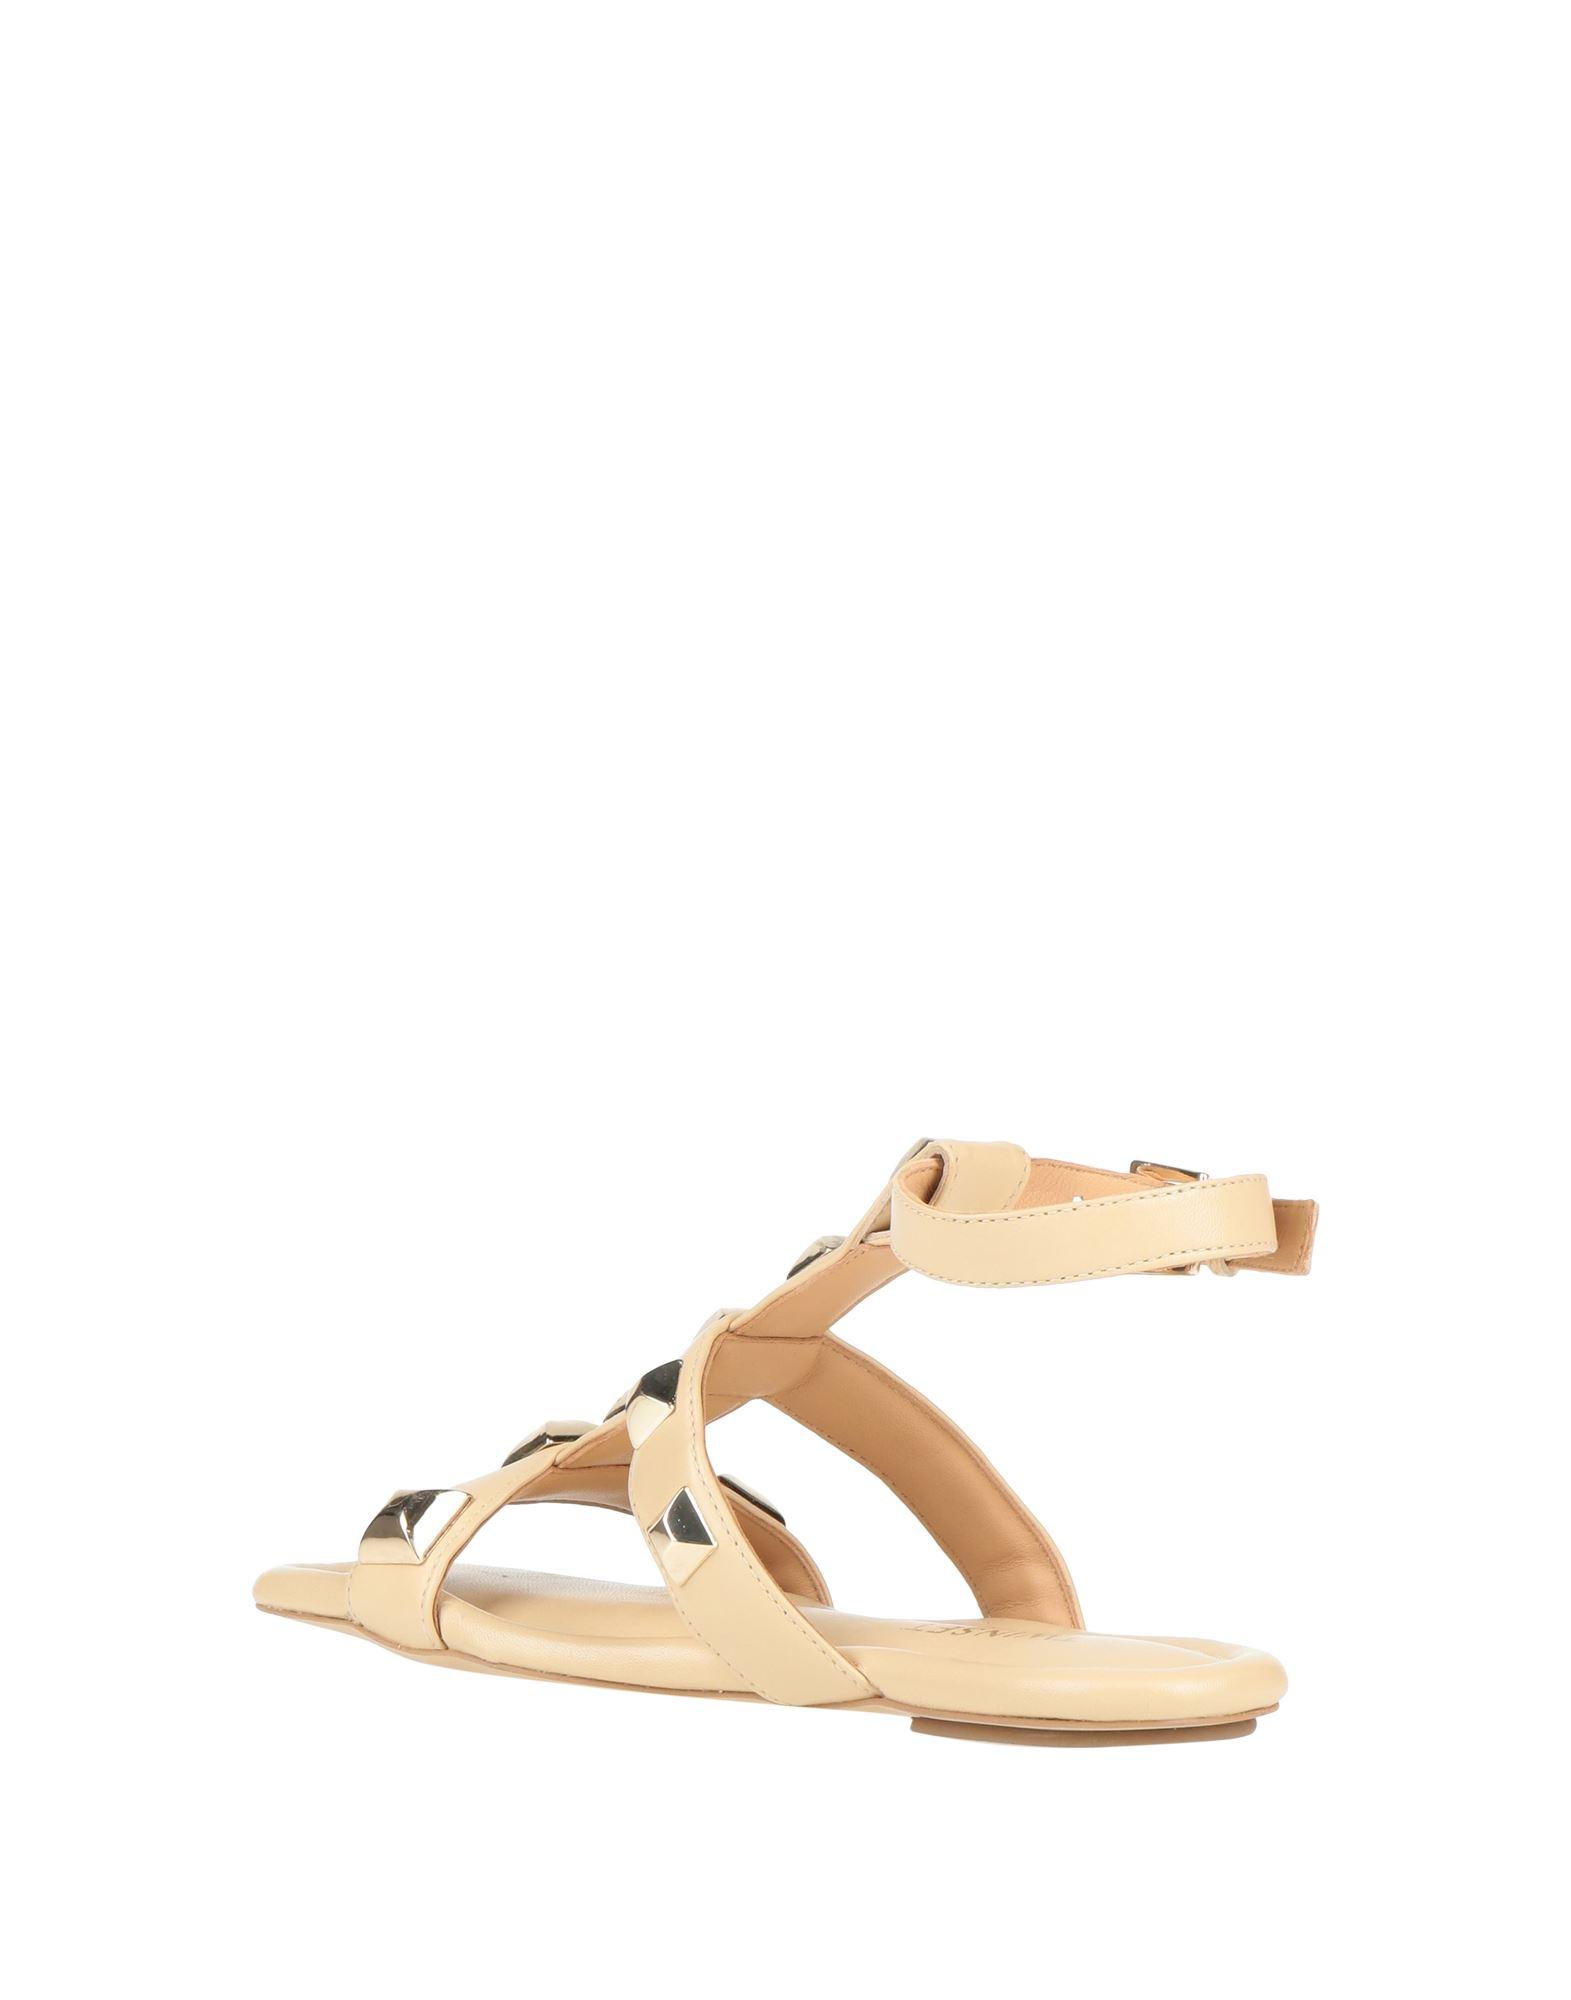 Twinset Sandals in Natural | Lyst